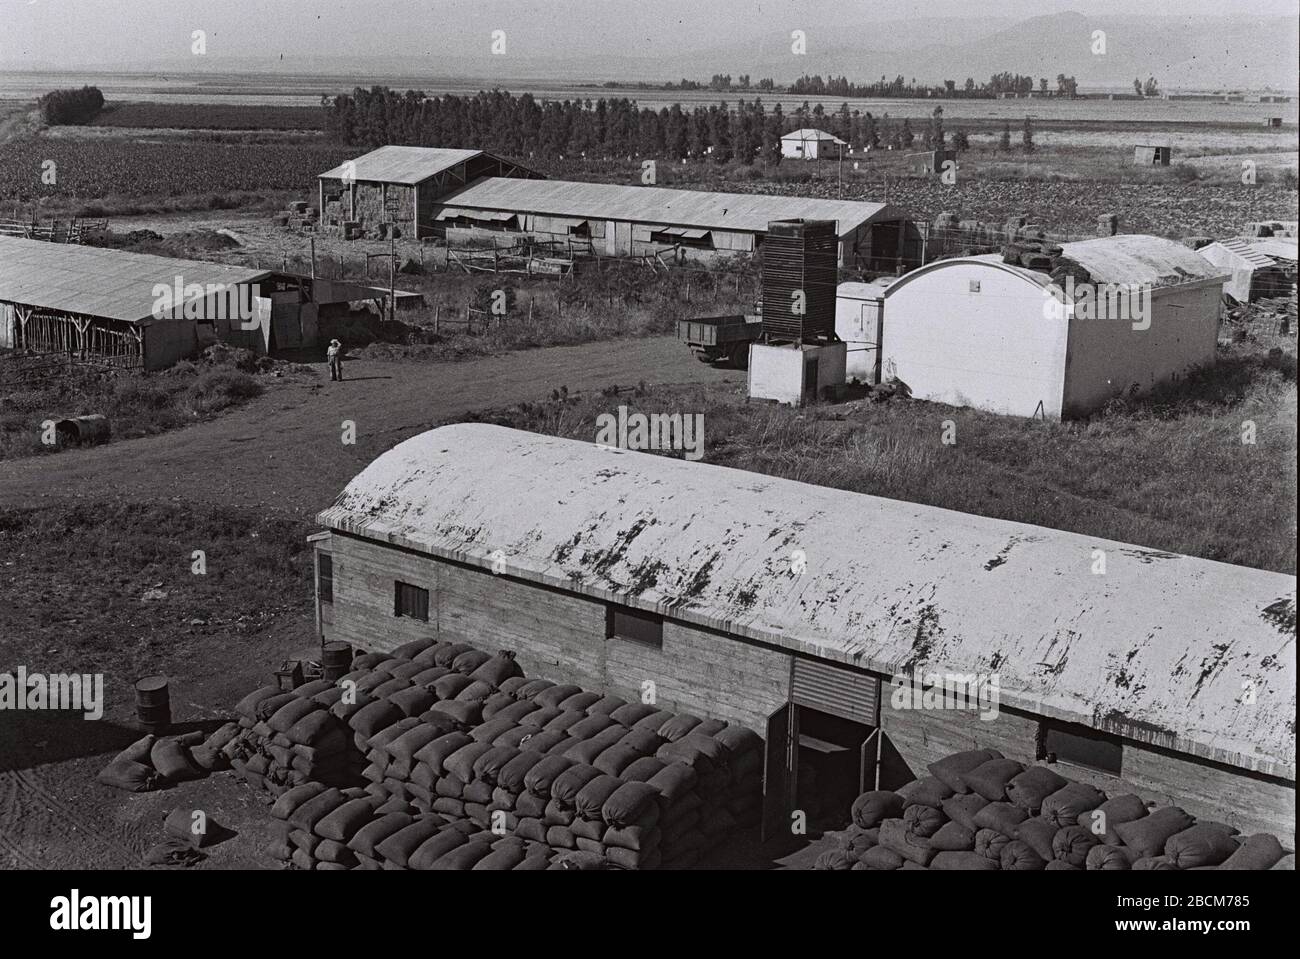 English The Fodder Warehouse At Kibbutz Amir U O U I U I E E Ss O E I U O 30 June 1946 This Is Available From National Photo Collection Of Israel Photography Dept Goverment Press Office Link Under The Digital